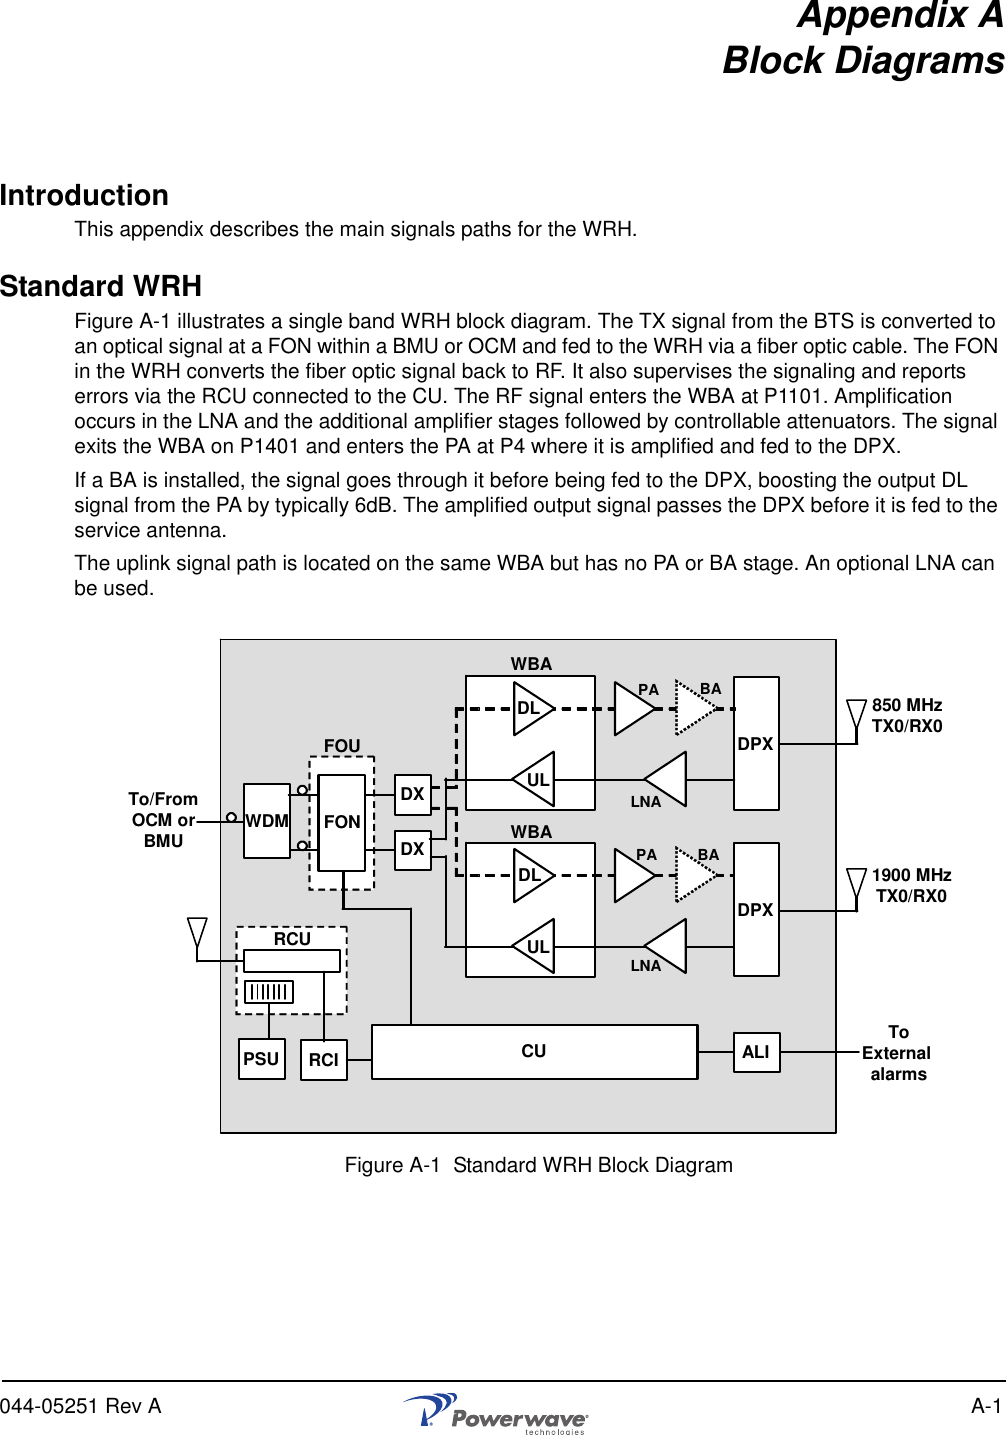 044-05251 Rev A A-1Appendix ABlock DiagramsIntroductionThis appendix describes the main signals paths for the WRH.Standard WRHFigure A-1 illustrates a single band WRH block diagram. The TX signal from the BTS is converted to an optical signal at a FON within a BMU or OCM and fed to the WRH via a fiber optic cable. The FON in the WRH converts the fiber optic signal back to RF. It also supervises the signaling and reports errors via the RCU connected to the CU. The RF signal enters the WBA at P1101. Amplification occurs in the LNA and the additional amplifier stages followed by controllable attenuators. The signal exits the WBA on P1401 and enters the PA at P4 where it is amplified and fed to the DPX. If a BA is installed, the signal goes through it before being fed to the DPX, boosting the output DL signal from the PA by typically 6dB. The amplified output signal passes the DPX before it is fed to the service antenna.The uplink signal path is located on the same WBA but has no PA or BA stage. An optional LNA can be used.Figure A-1  Standard WRH Block DiagramWDMFOUDXDXDPXDPXWBAWBADLDLULUL LNALNAPAPATo/FromOCM orBMURCURCIPSU CUFONALI ToExternal alarmsBABA850 MHzTX0/RX01900 MHzTX0/RX0